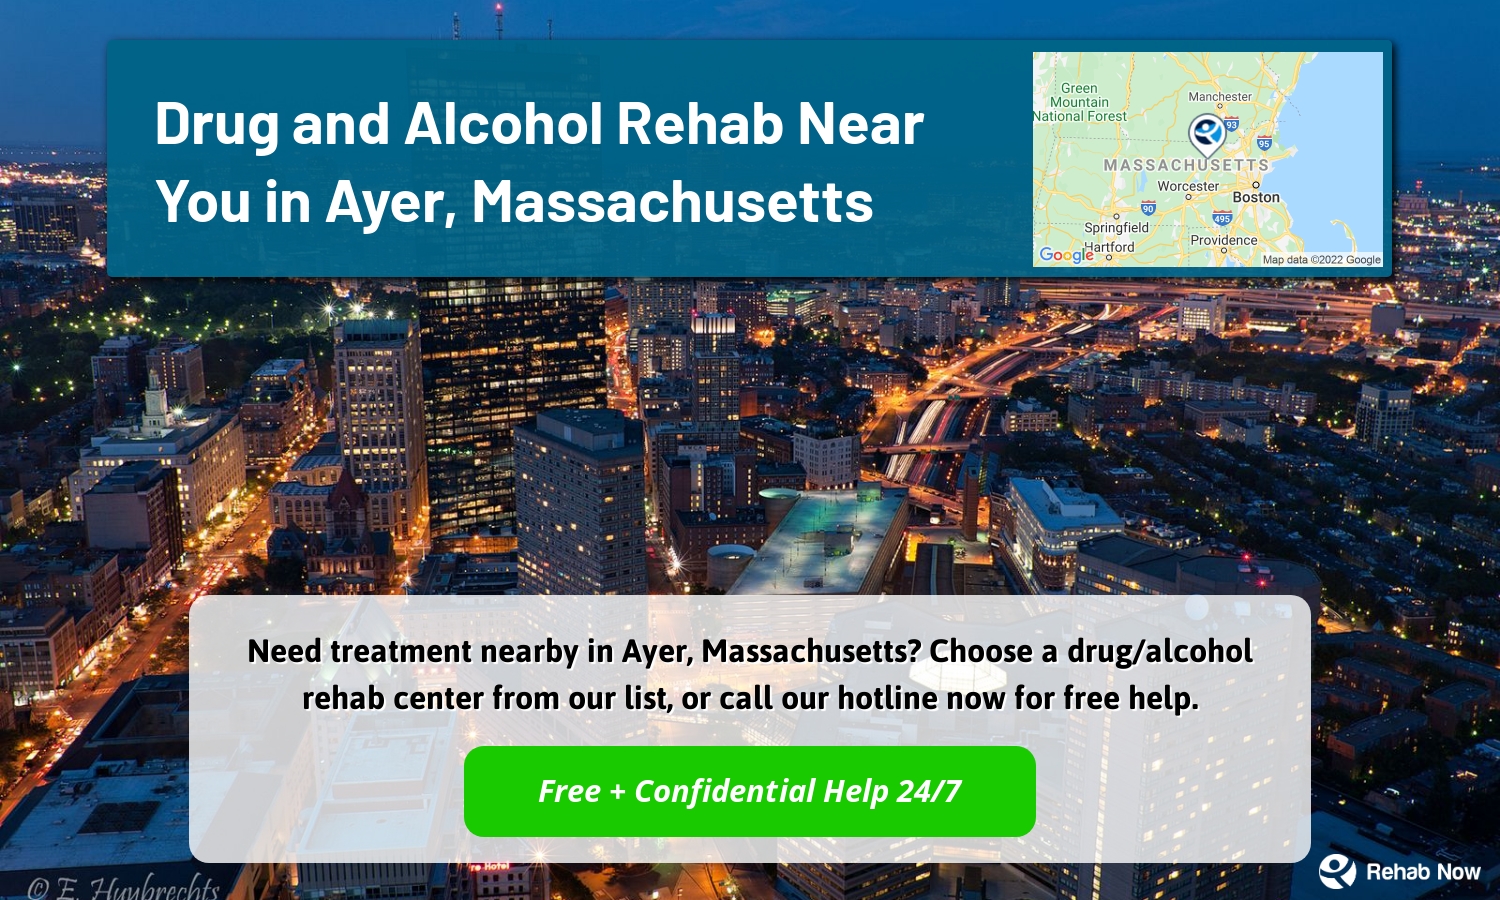 Need treatment nearby in Ayer, Massachusetts? Choose a drug/alcohol rehab center from our list, or call our hotline now for free help.